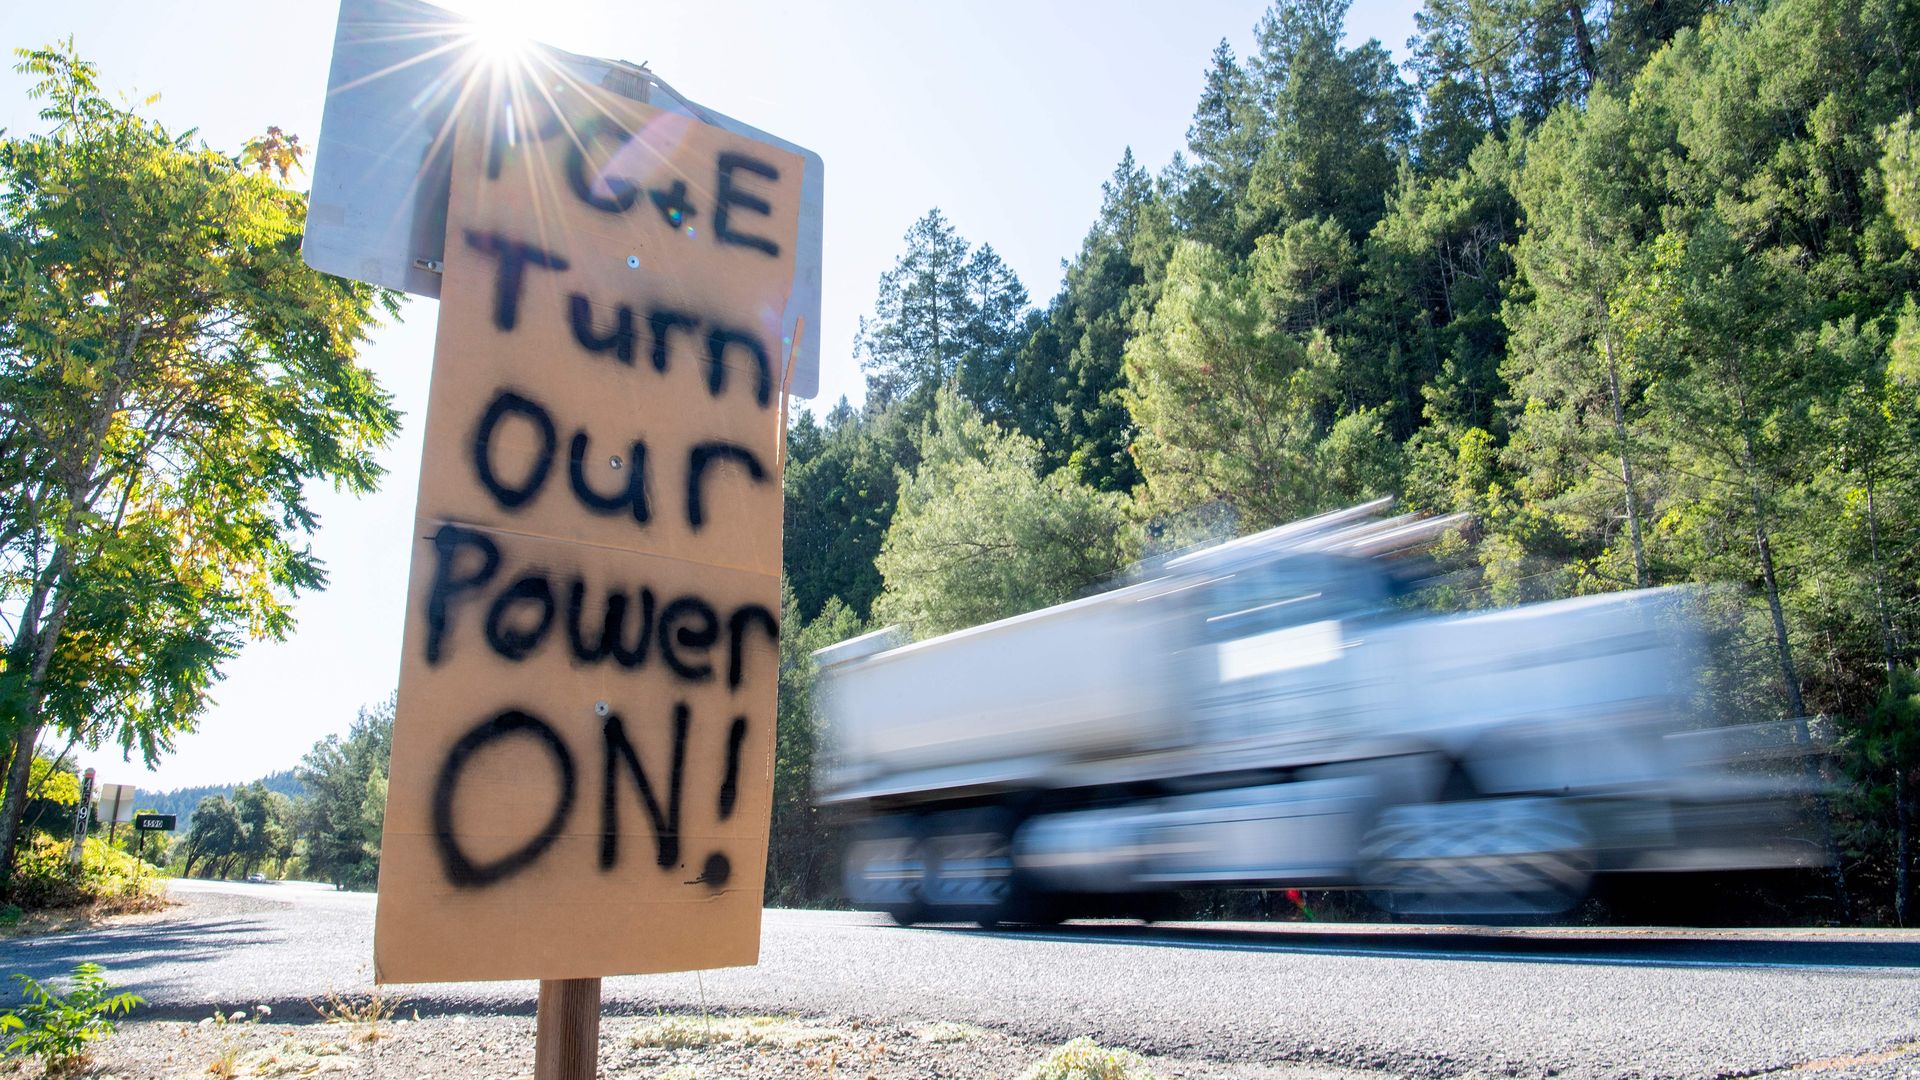 A sign calling PG&E to turn the power back on.